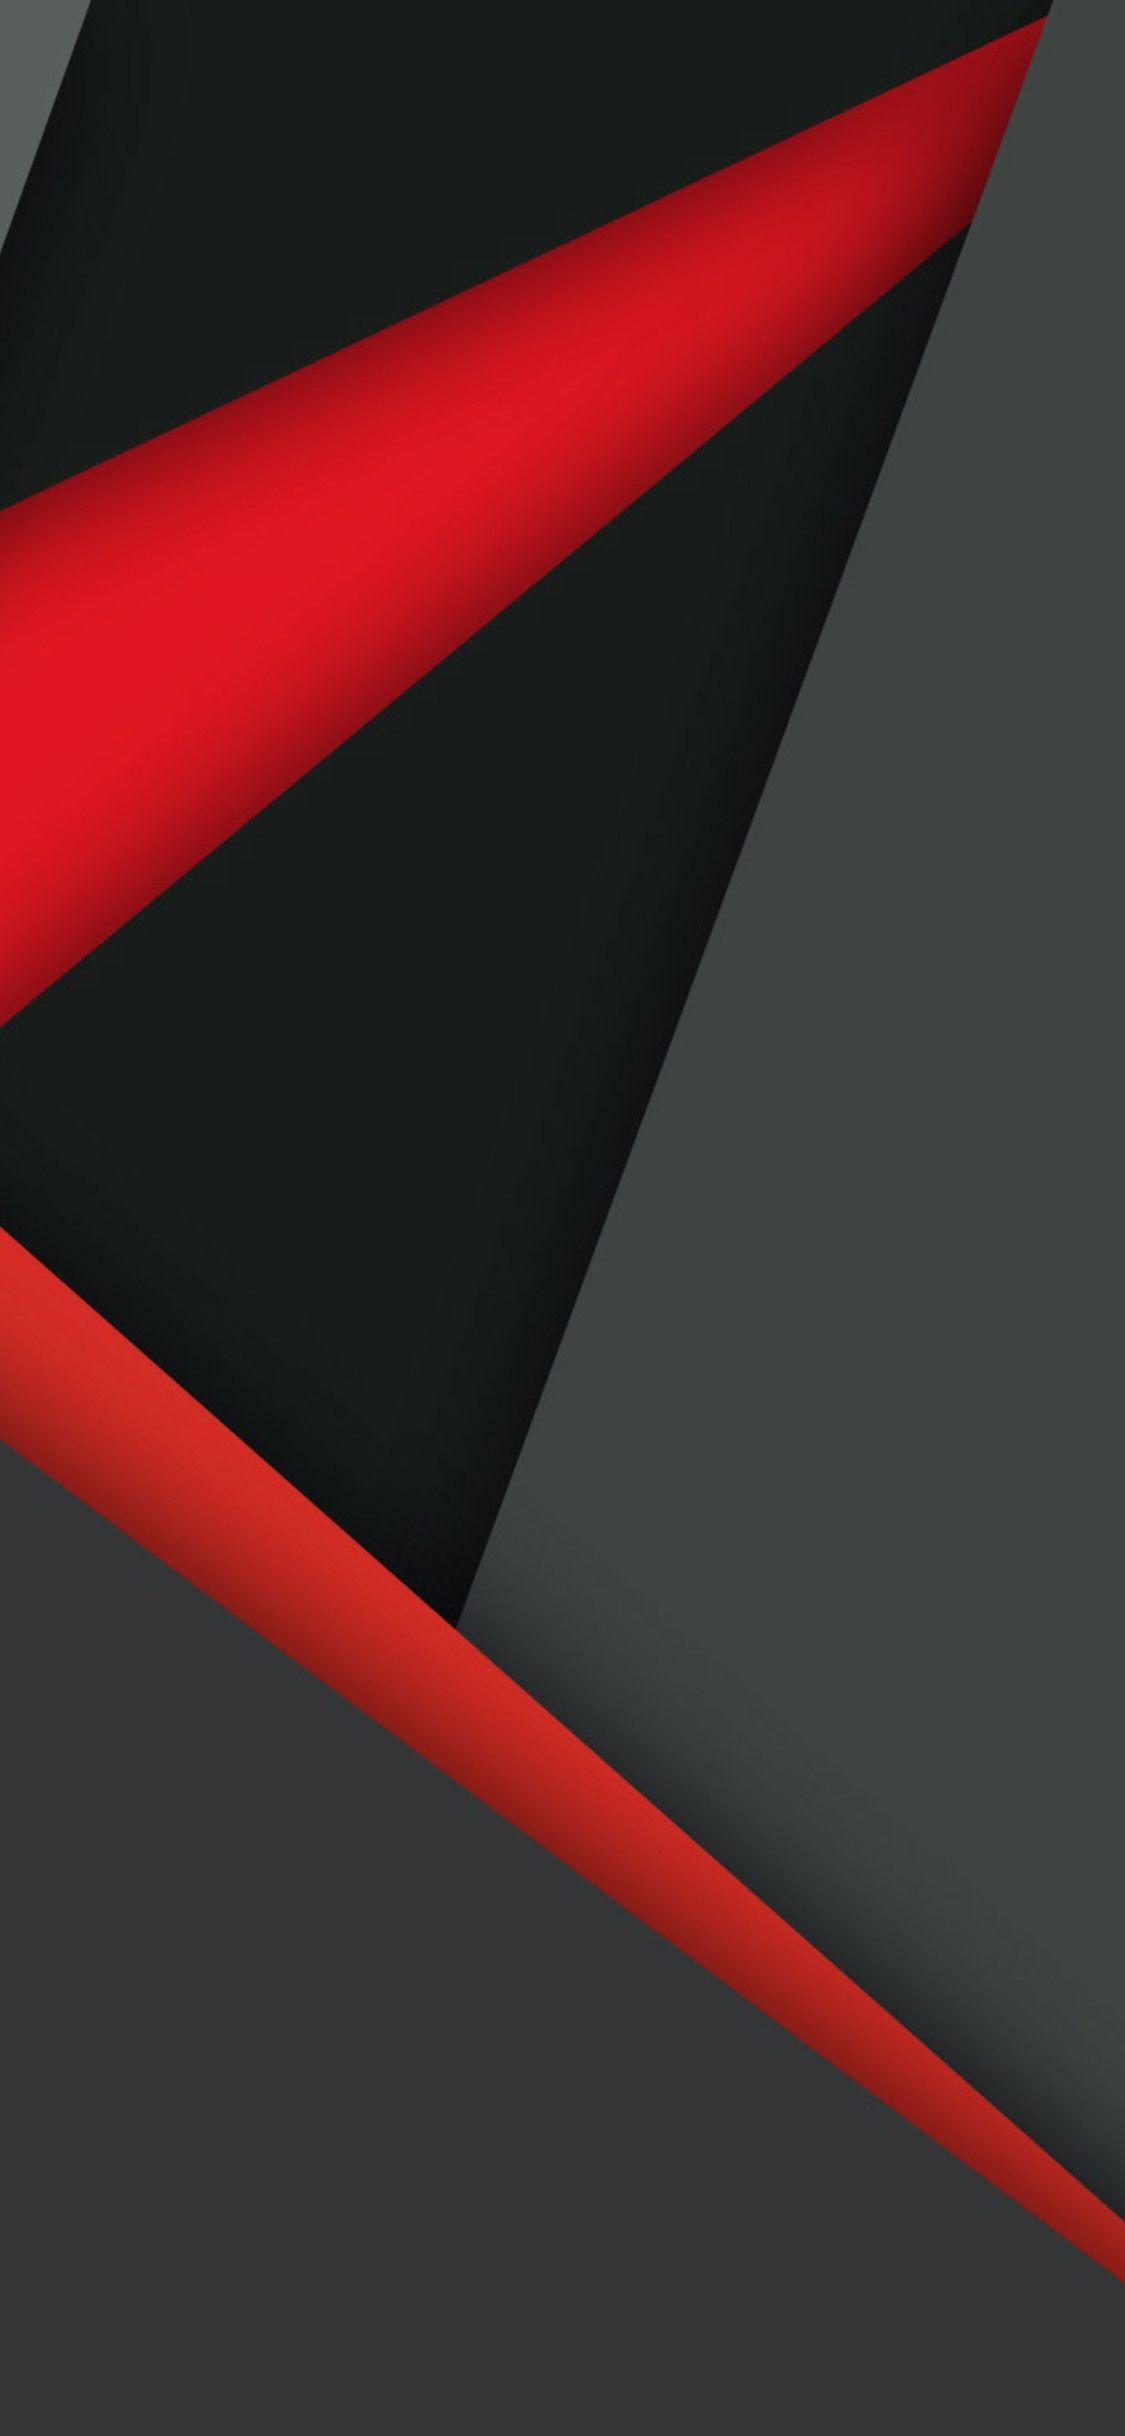 Black And Red Wallpaper 4K For Mobile - Awesome wallpaper for desktop